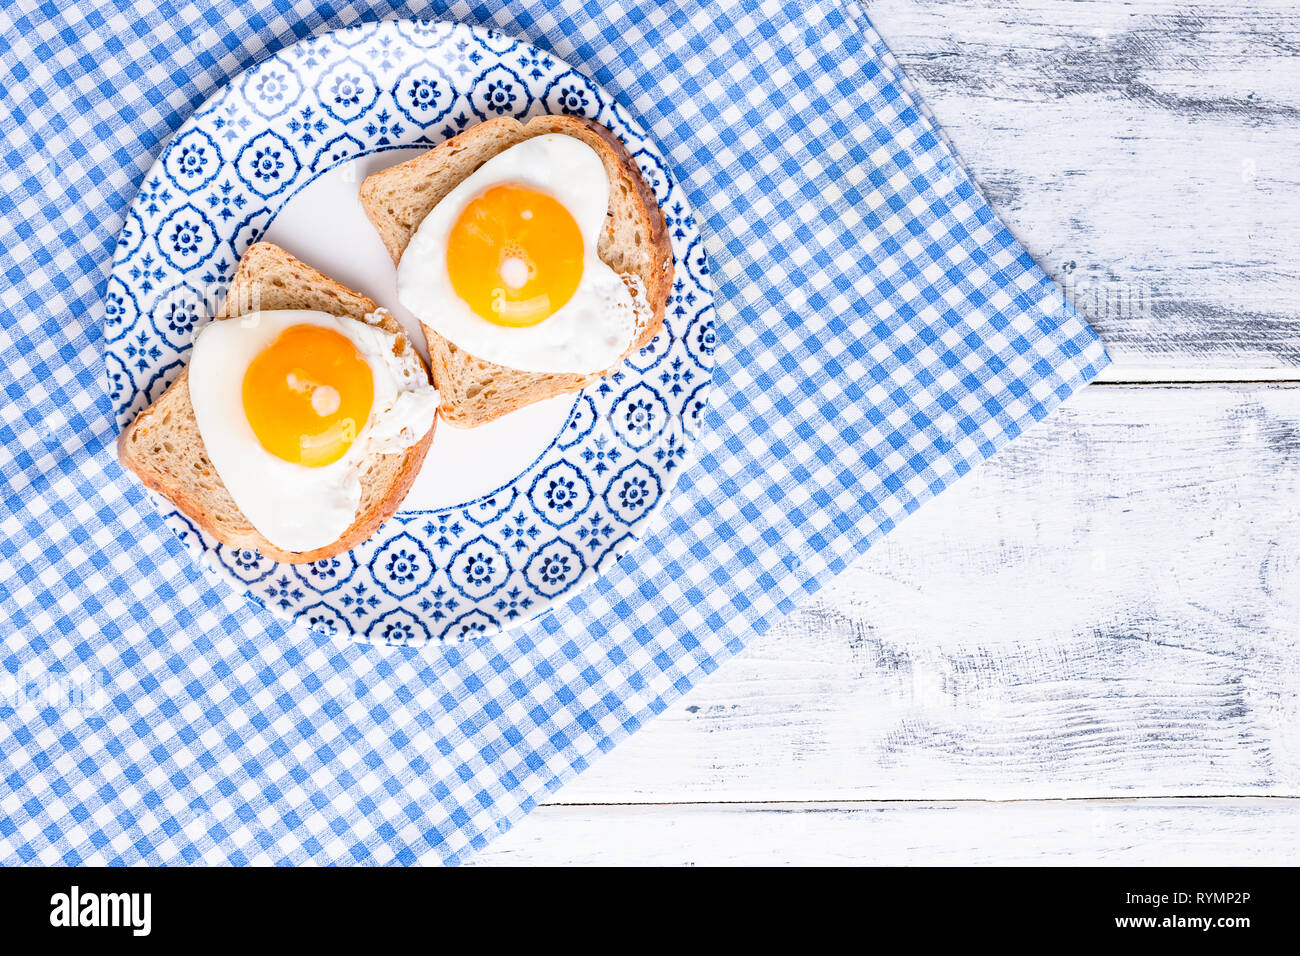 Breakfast of 2 fried heart shaped eggs. Romantic morning surpriiz on holiday. Valentine's day concept. Copy space, Flat lay Stock Photo